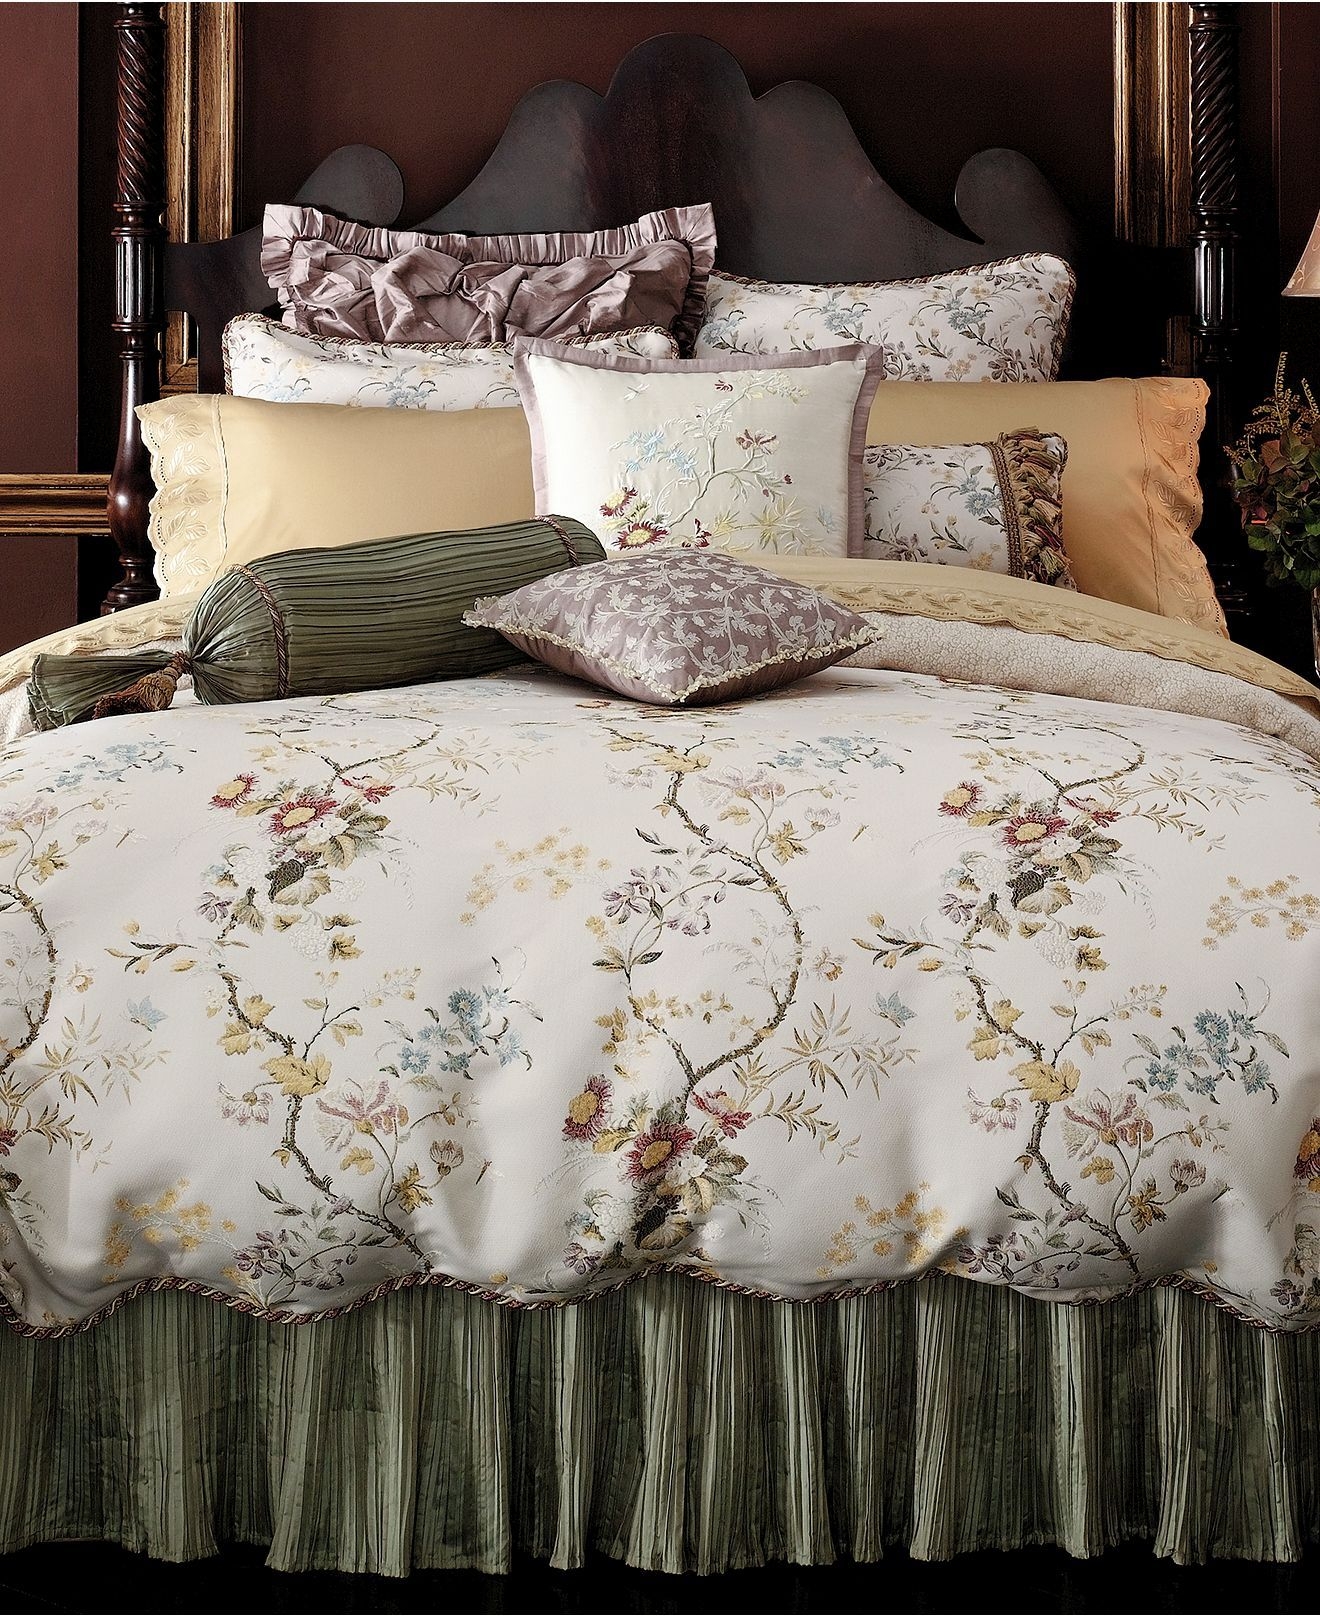 New waterford kiana queen floral comforter